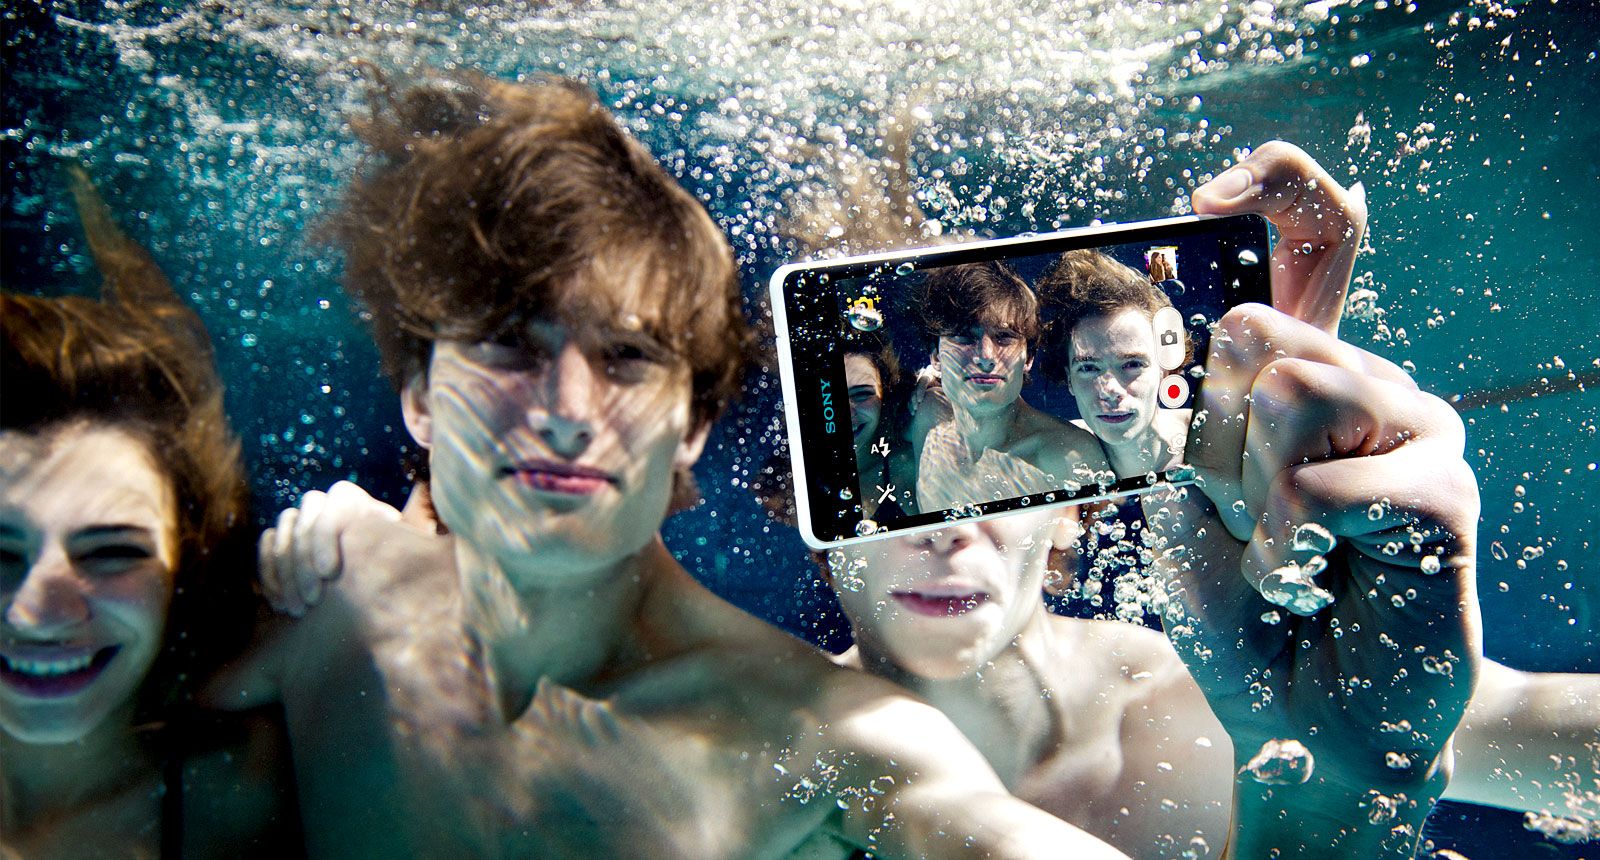 sony xperia zr offers underwater photos and video impressive android specs image 1